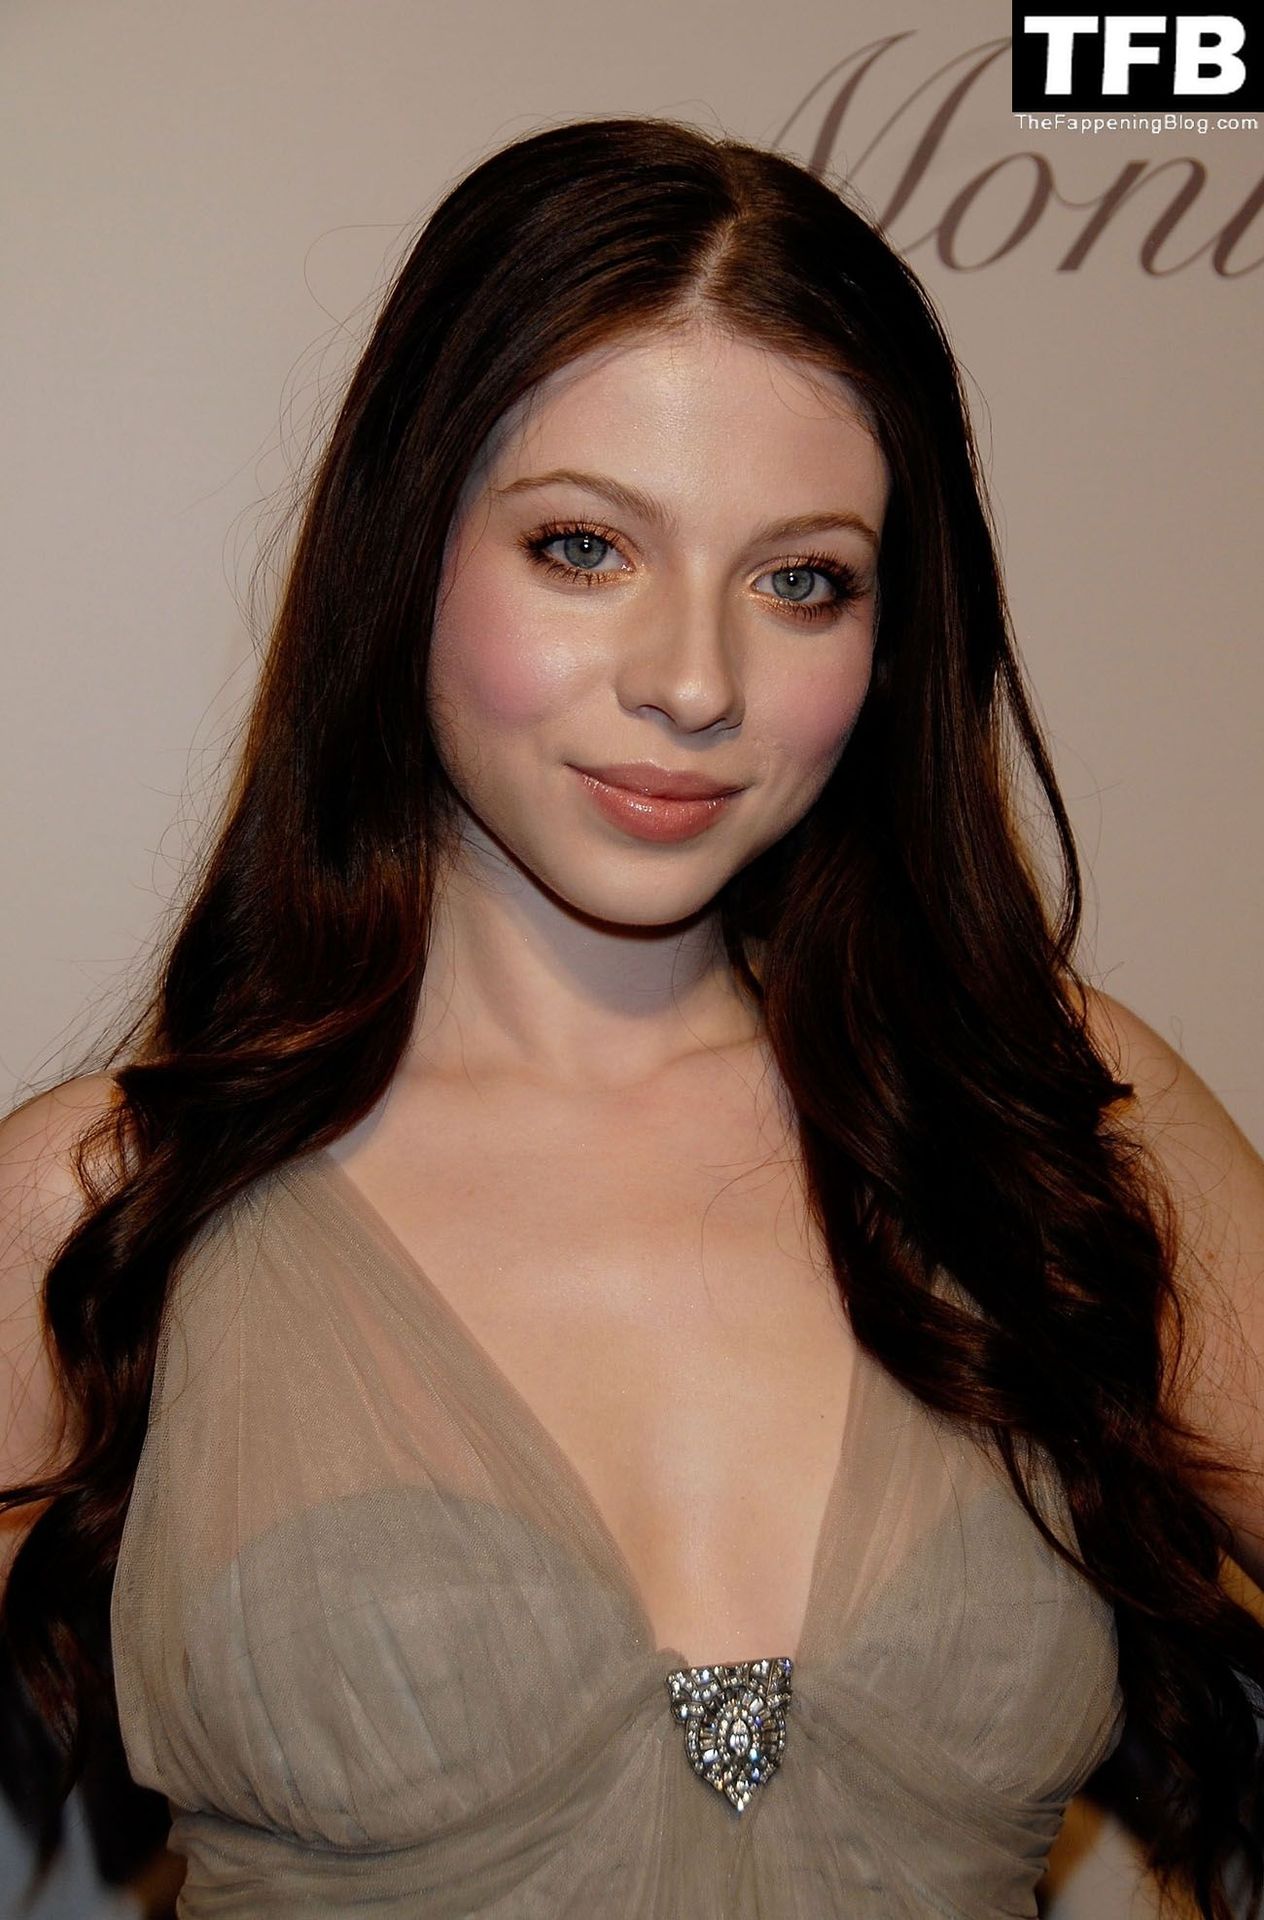 michelle trachtenberg 103 thefappeningblog.com  - Michelle Trachtenberg Nude & Sexy Collection (122 Photo)